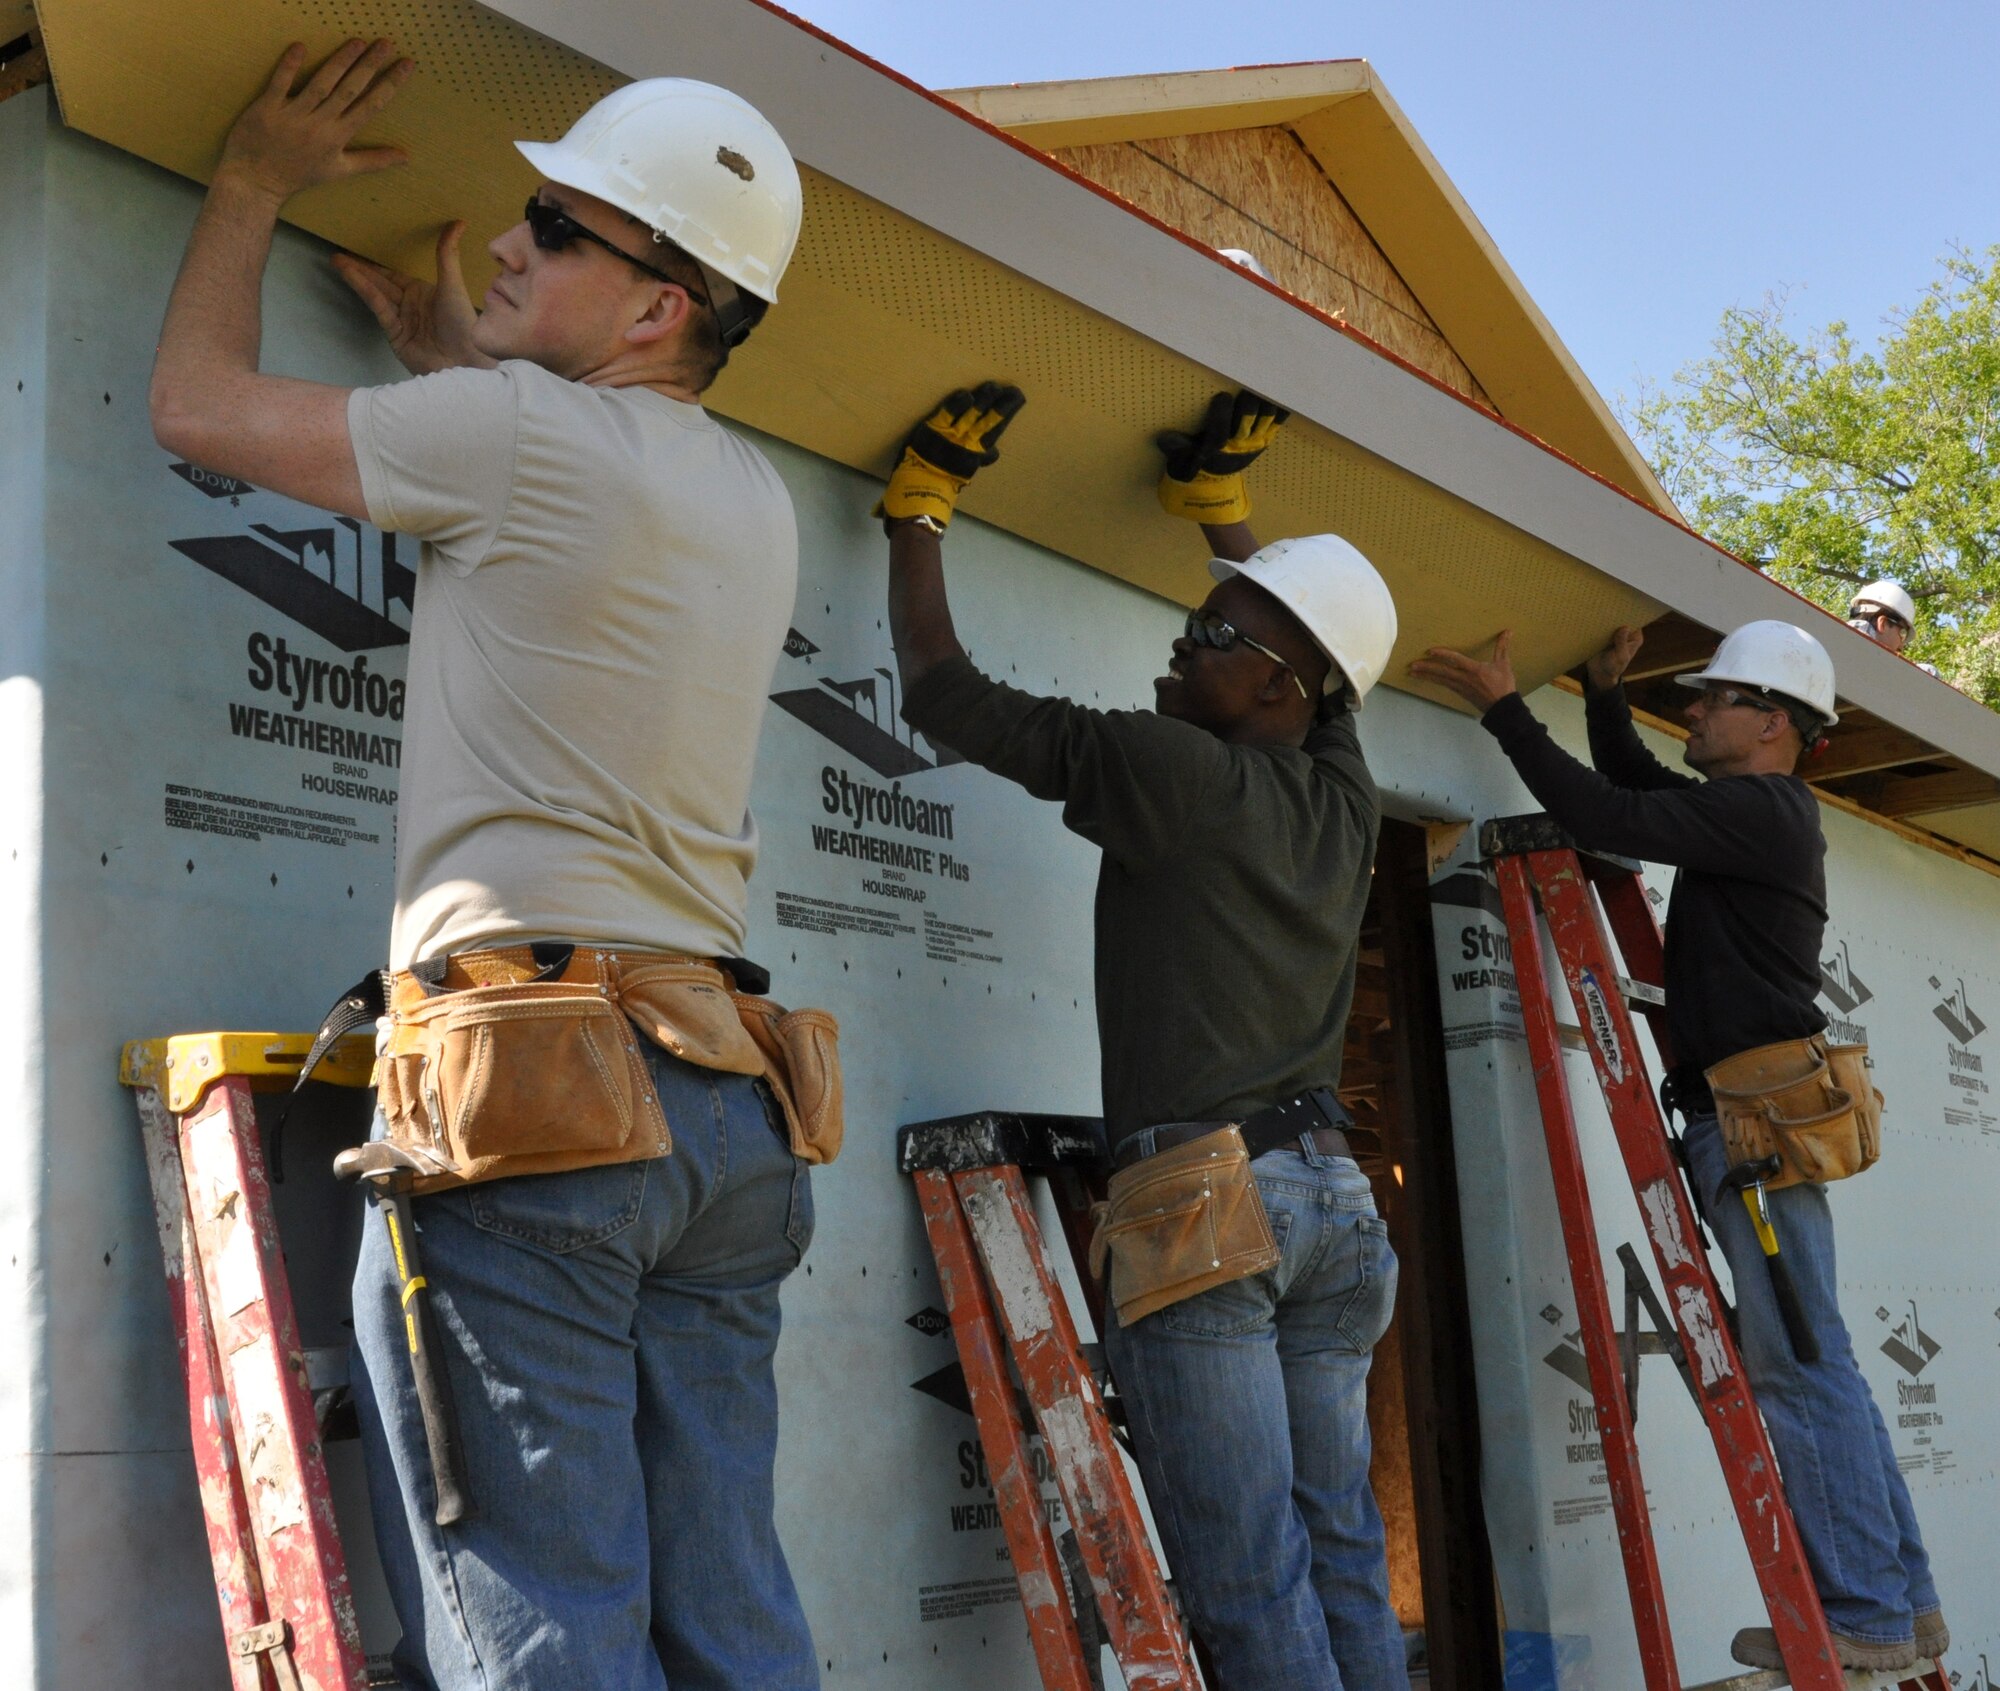 (left to right) Senior Airman Will Howell, 301st Aircraft Maintenance Squadron specialist, Chris, the future recipient of the house and Master Sergeant Gene Gaspar, 301st AMXS weapons expediter, are setting the panels to be nailed down.  Chris is originally from South Africa and has to contribute 250 volunteer hours in order to receive the house. These 301st AMXS members spent the day building a house for a local Fort Worth resident under the Habitat for Humanity program. (U.S. Air Force photo/Senior Airman Jeremy Roman)